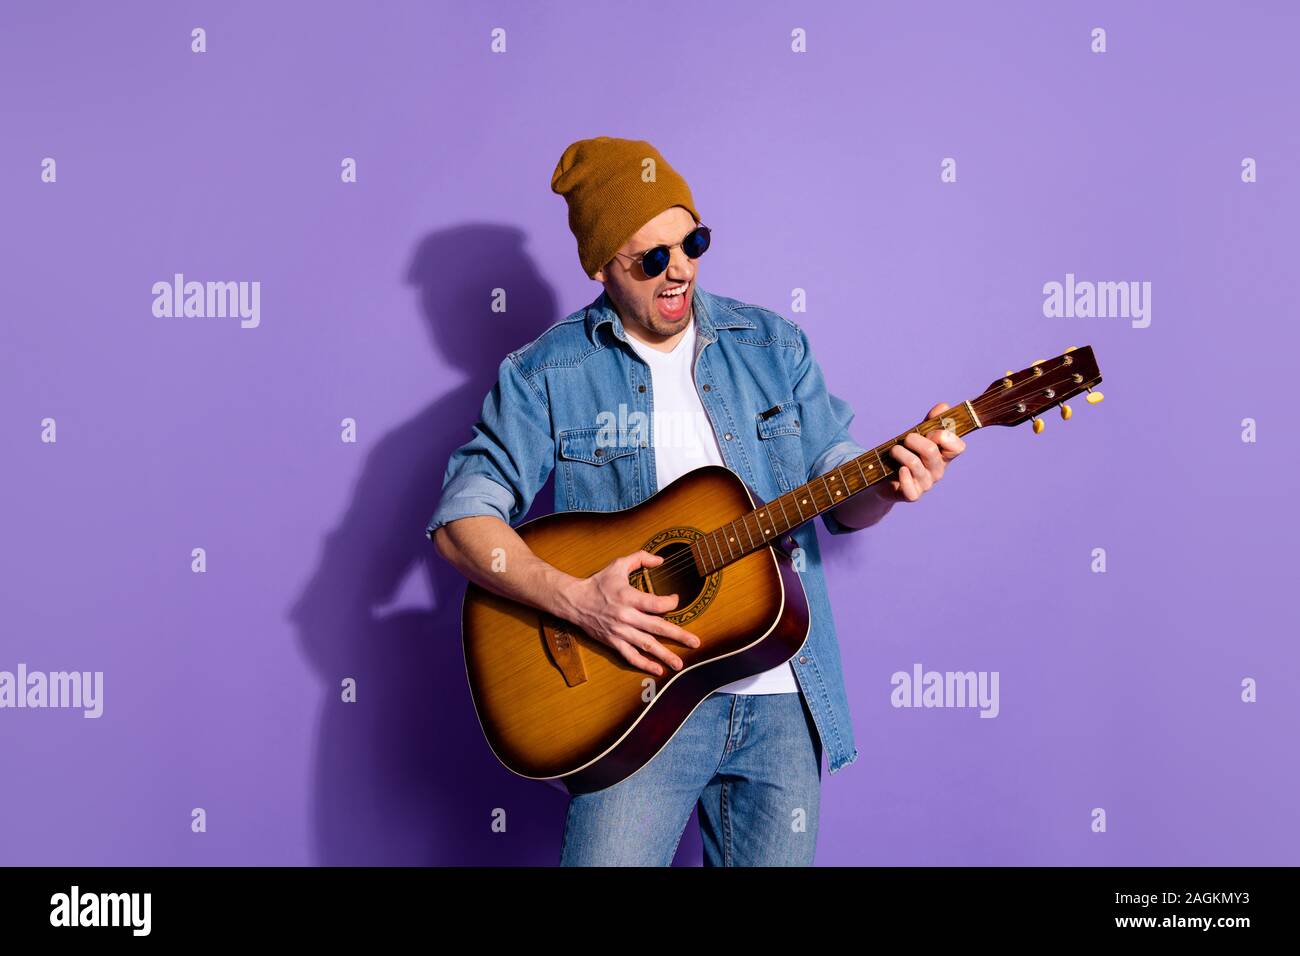 Photo de cheerful attractive grossier bel homme wearing cap holding guitar with hands playing instrument musicien portant des lunettes plus isolés Banque D'Images